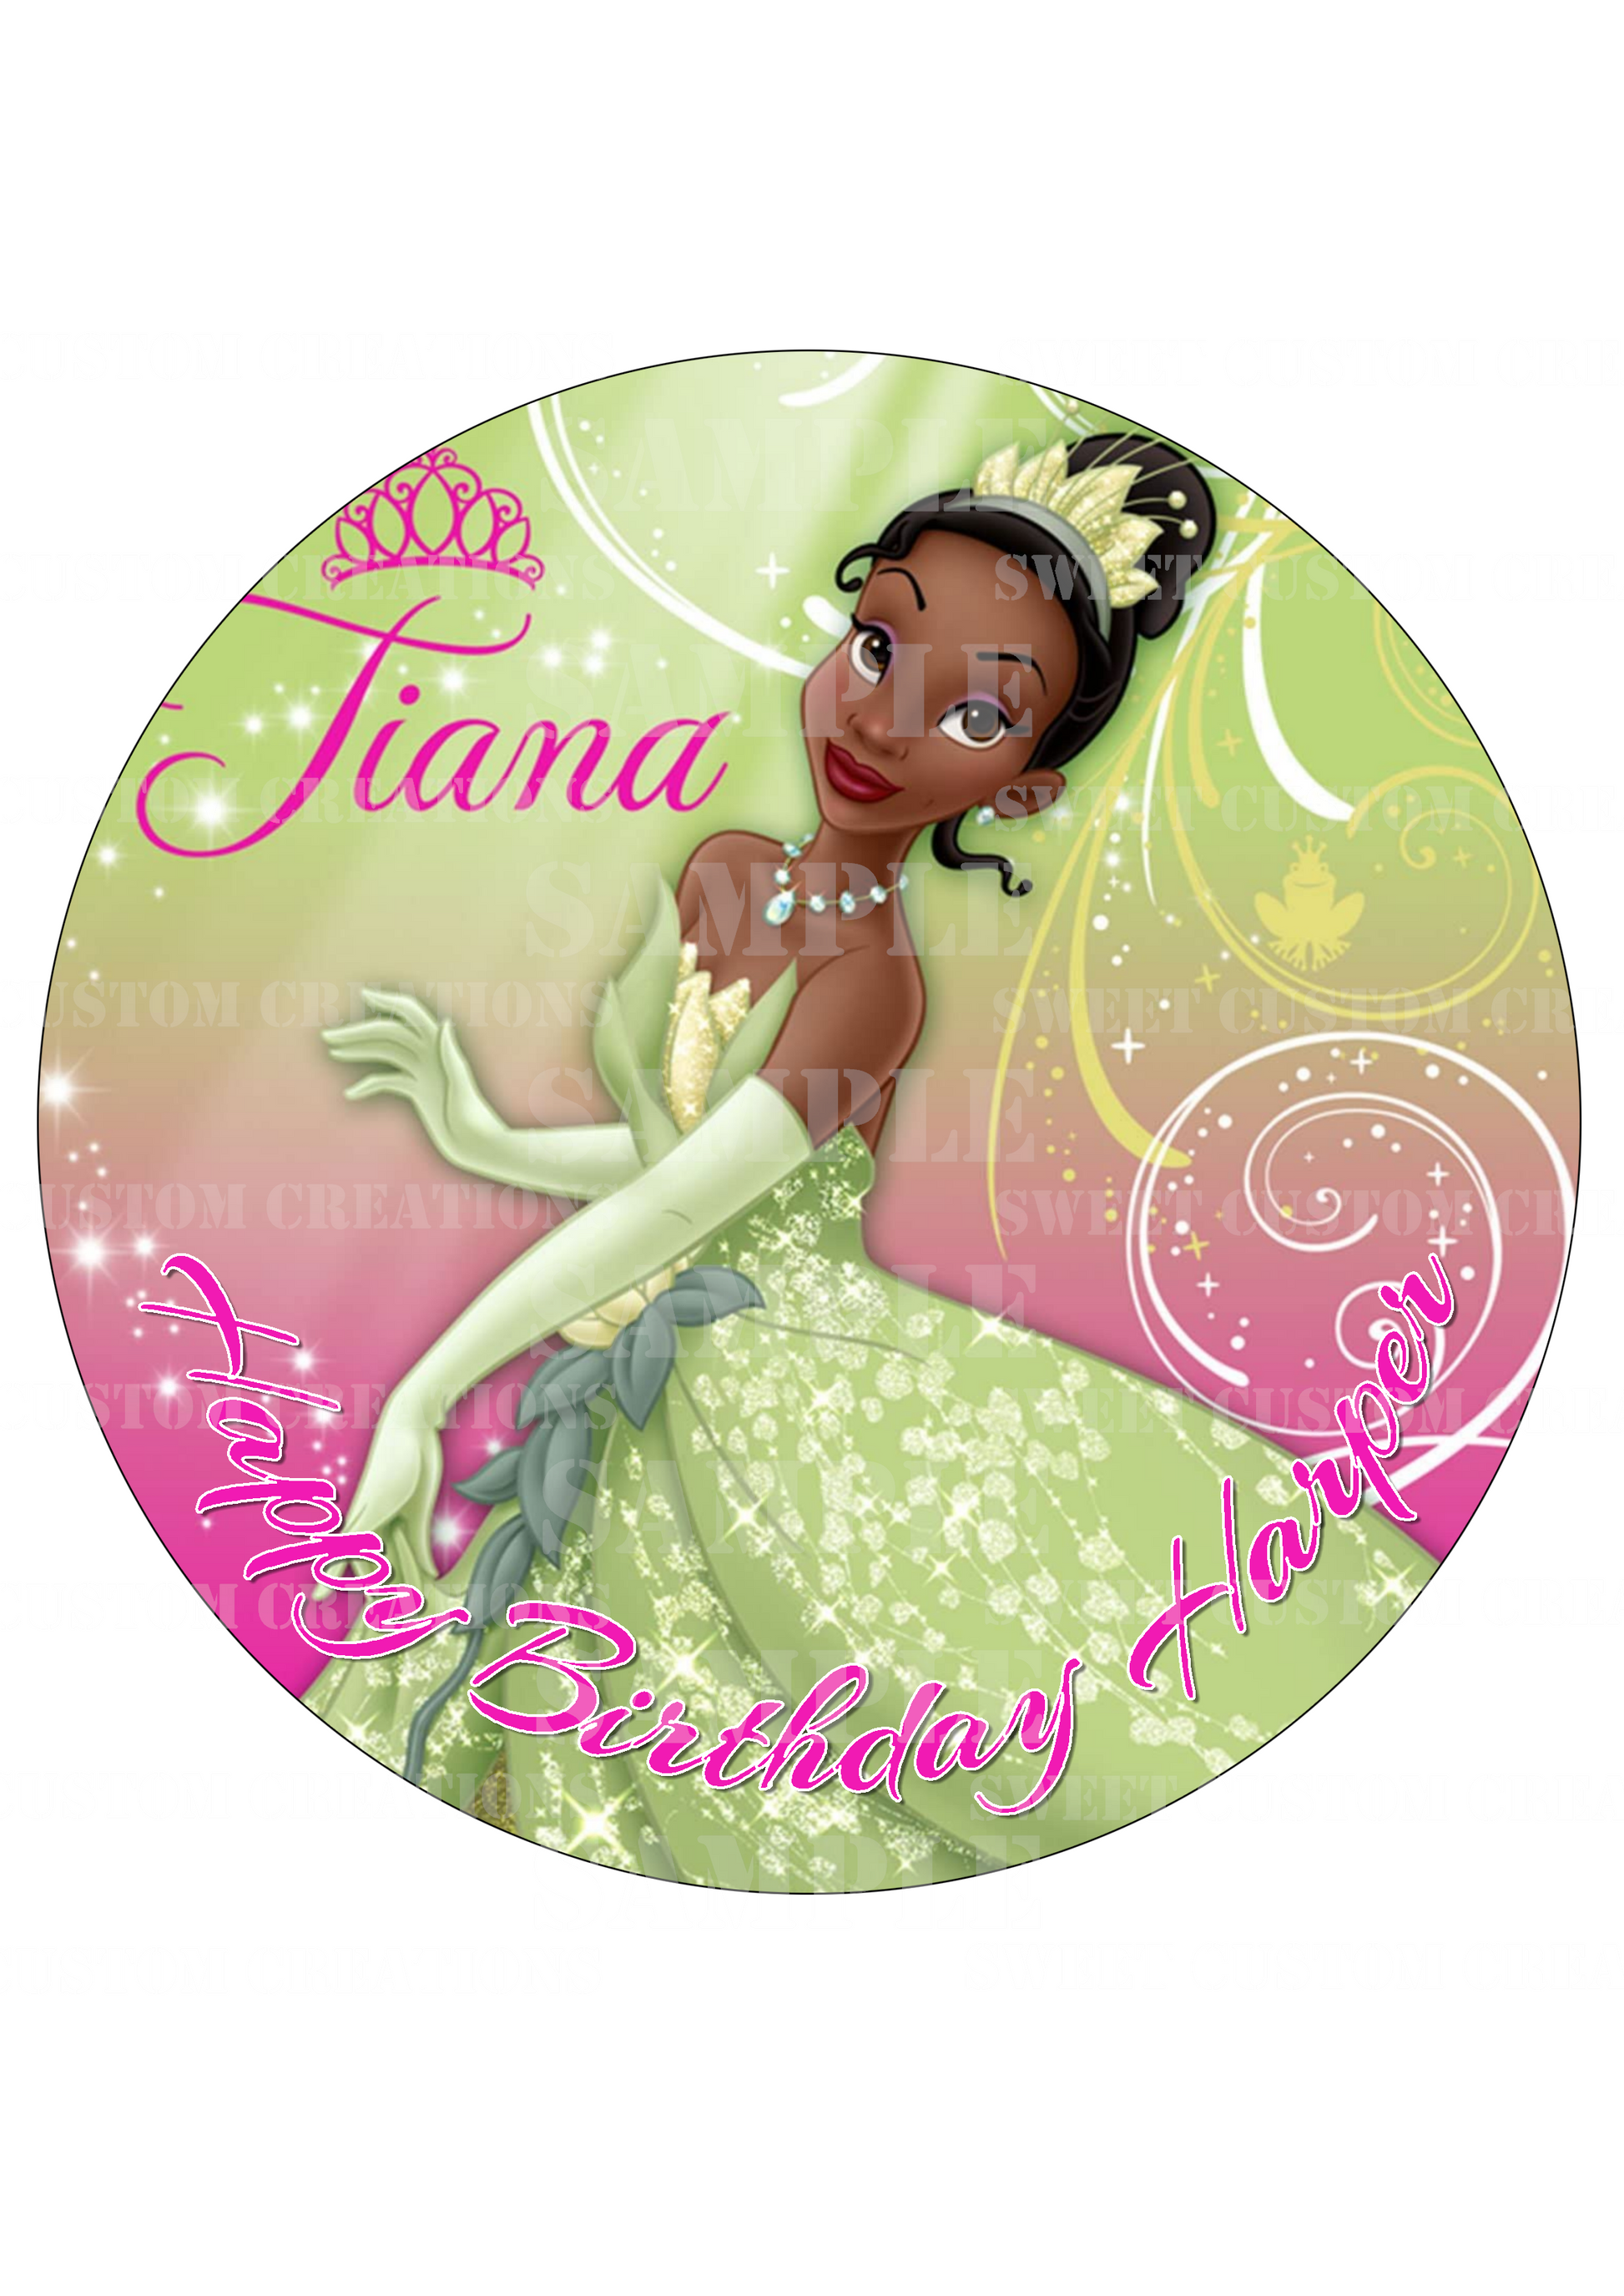 25 Disney Princess and the Frog Stickers Party Favors Tiana Princess #2